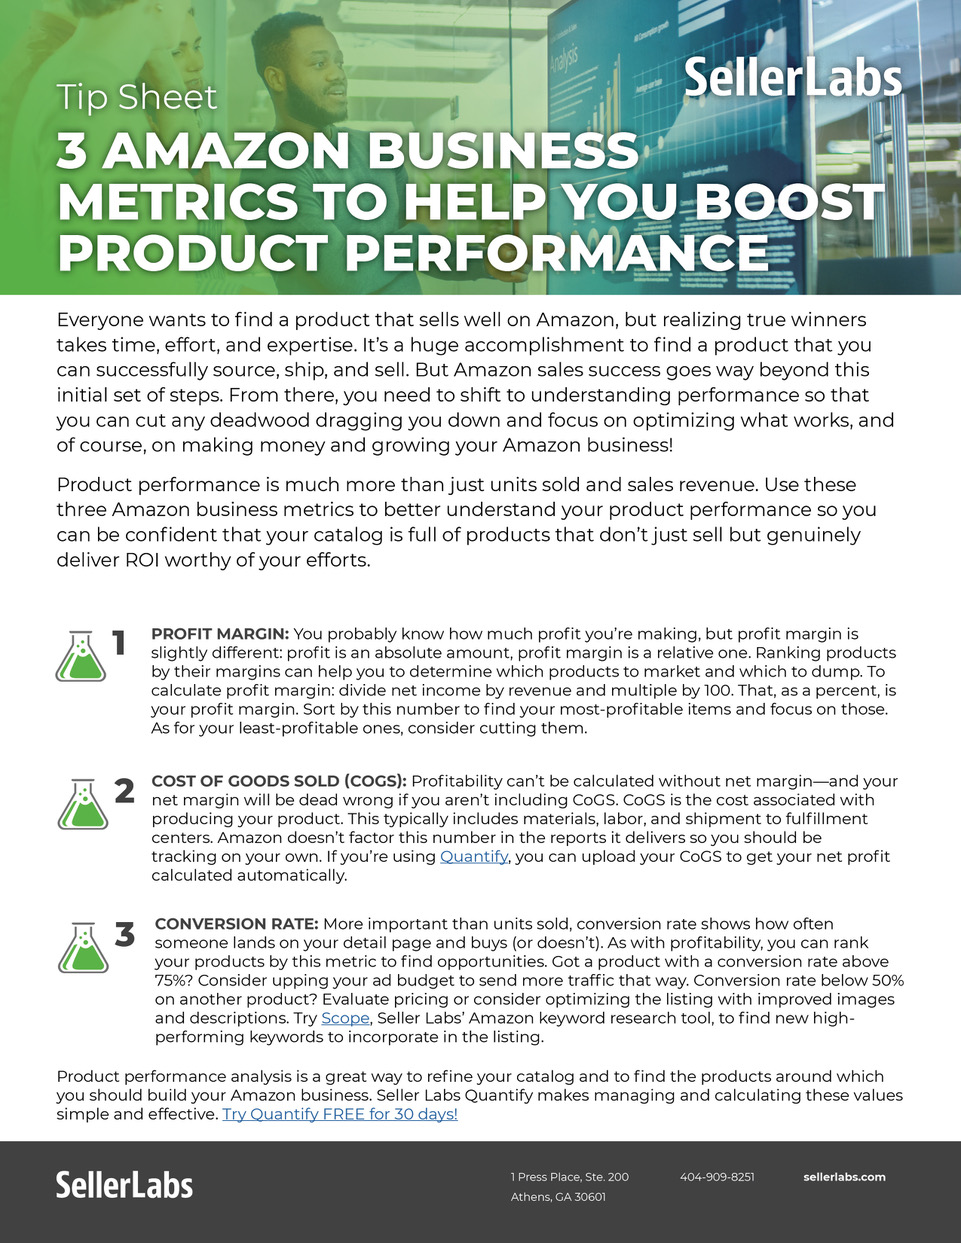 3 Amazon Business Metrics to Boost Product Performance - Seller Labs